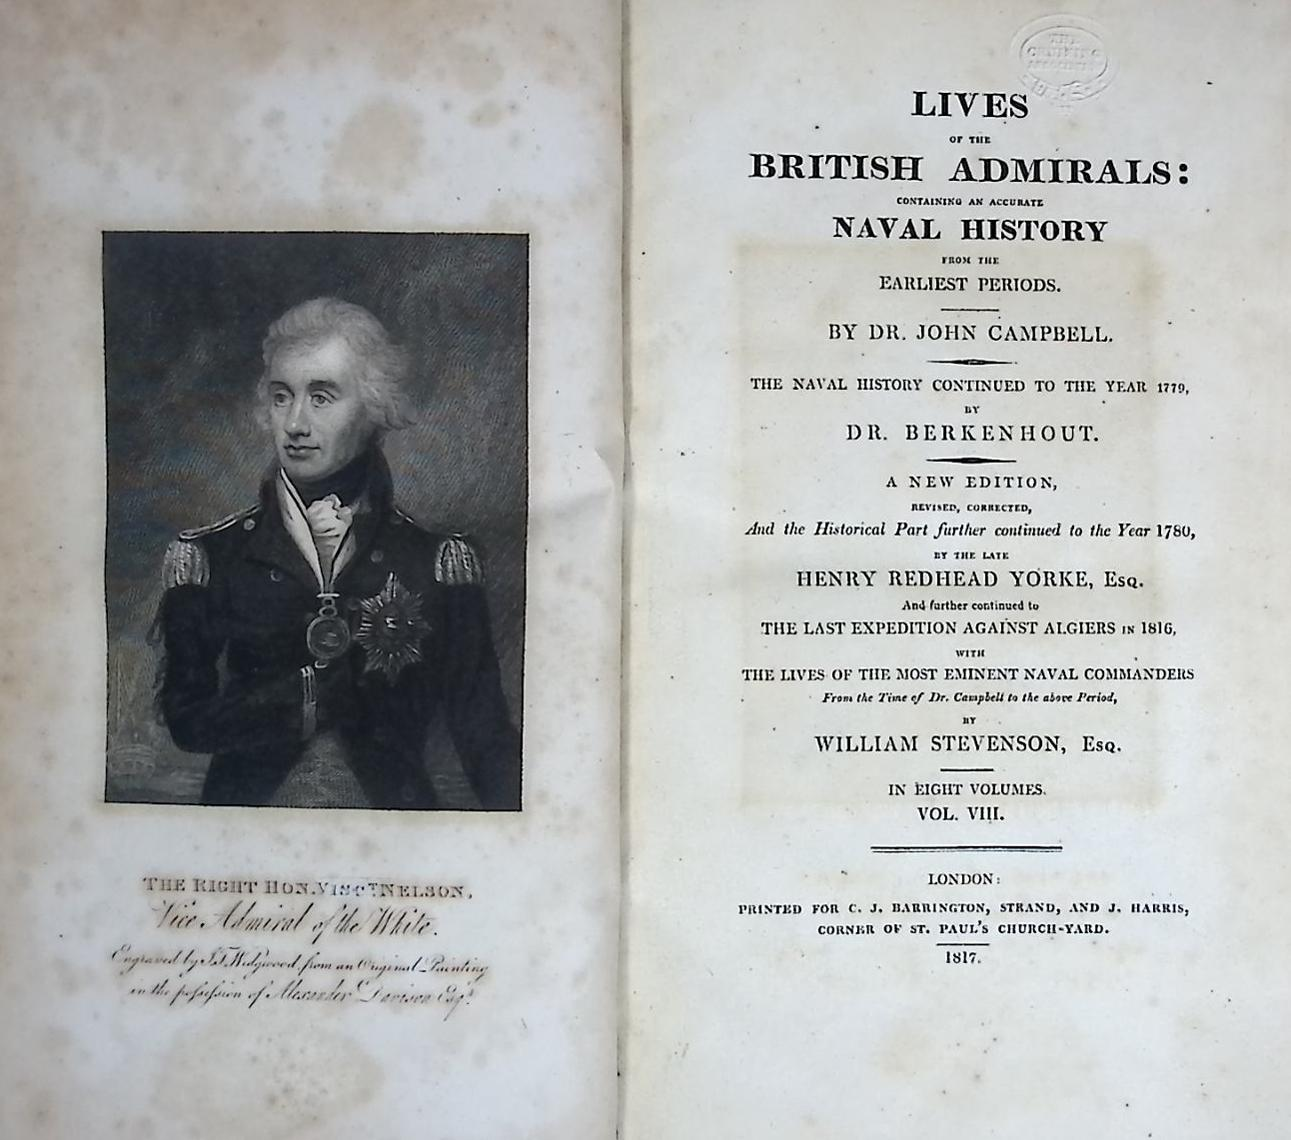 Lives of the British Admirals: Containing an Accurate Naval History from the Earliest Periods. 8 volume set.